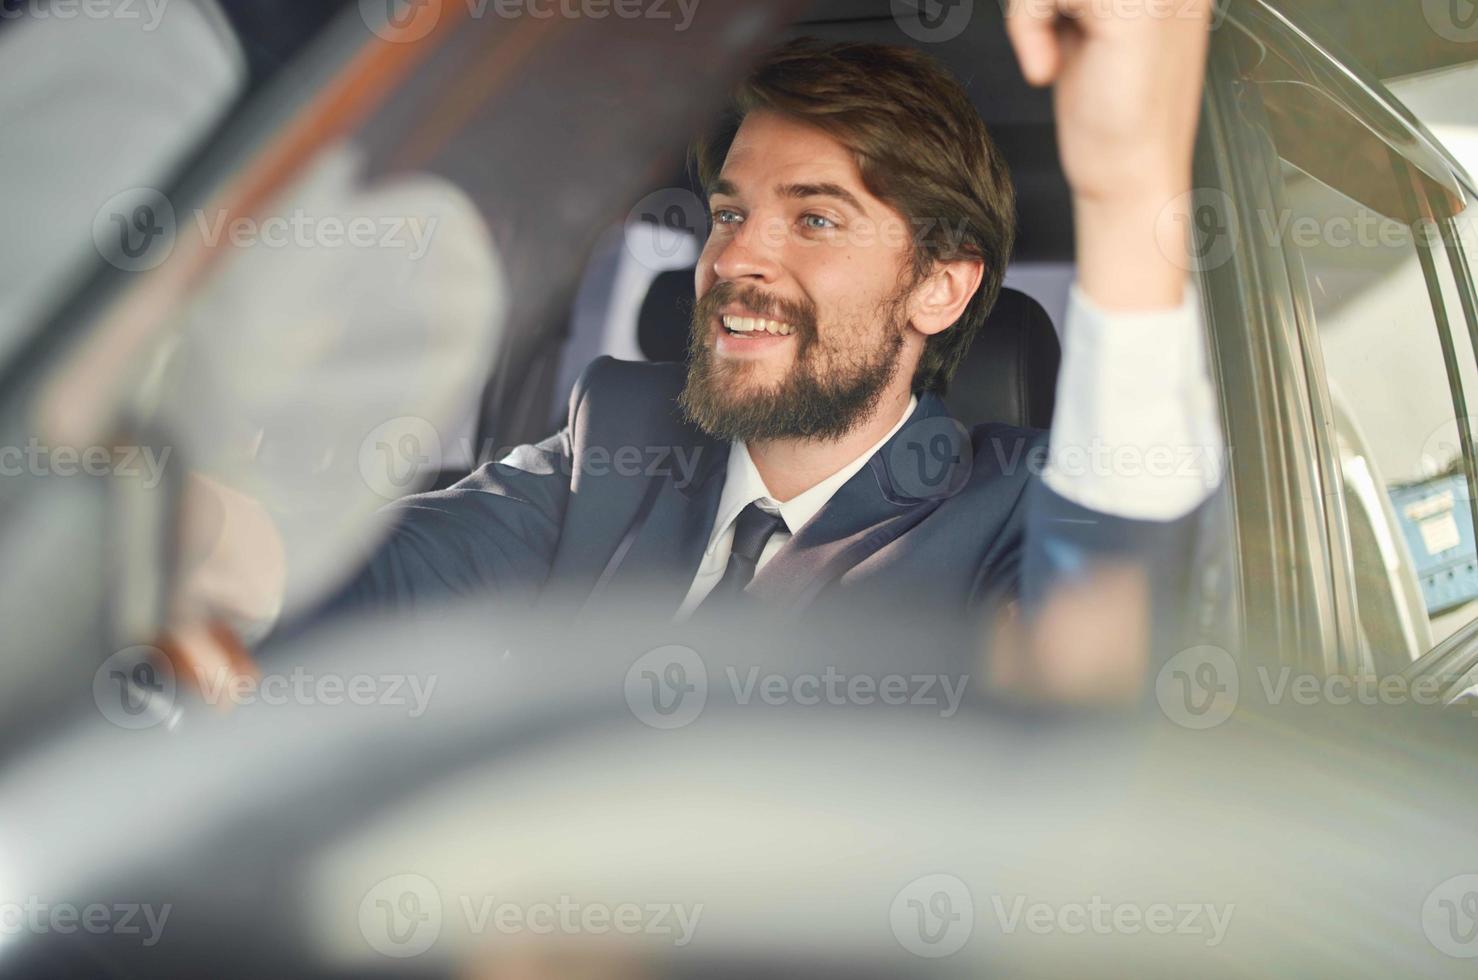 bearded man Driving a car trip luxury lifestyle self confidence photo